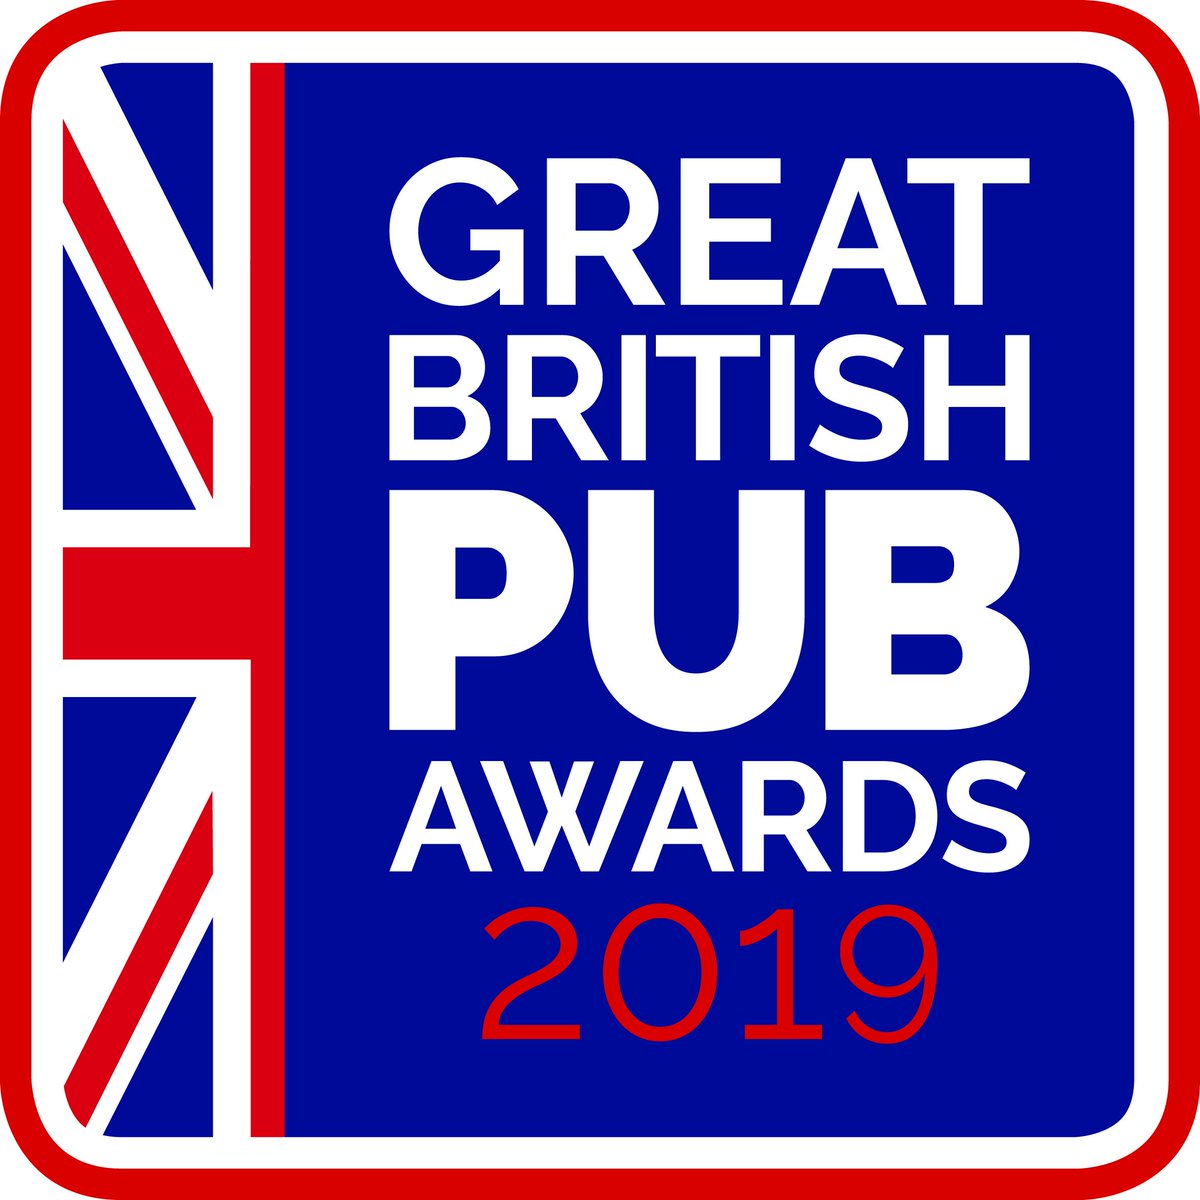 I am thrilled that my boozer @ChandosArmsPub is once more in the national finals of the Great British Pub Awards 2019, that's three years in row folks! This time as Best Local Pub! #greatbritishpubawards @starpubsandbars @morningadvertiser @ChandosArmsPub